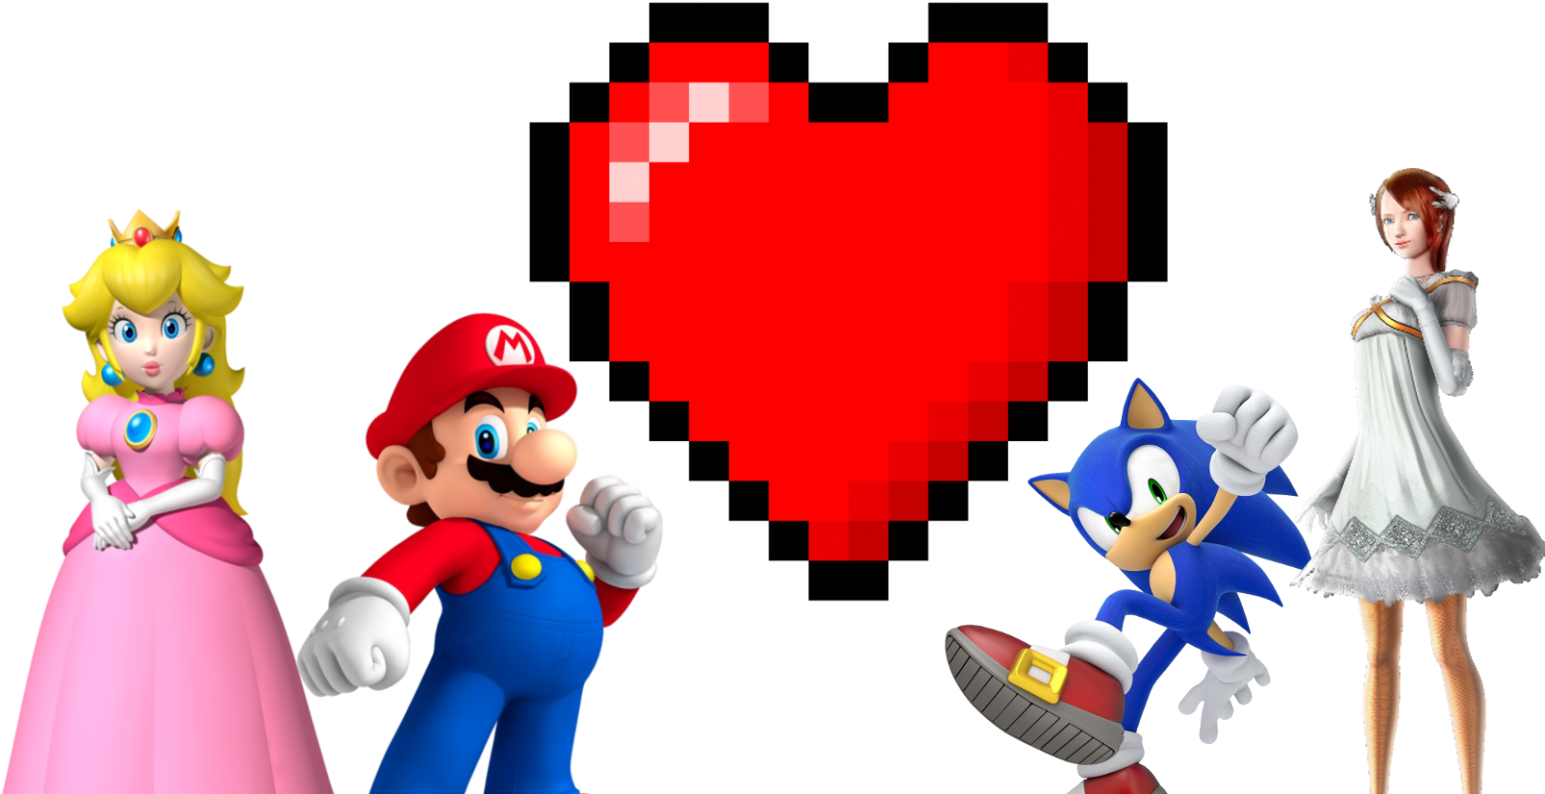 Val Day N For Nerds - 8 Bit Heart (1620x800)